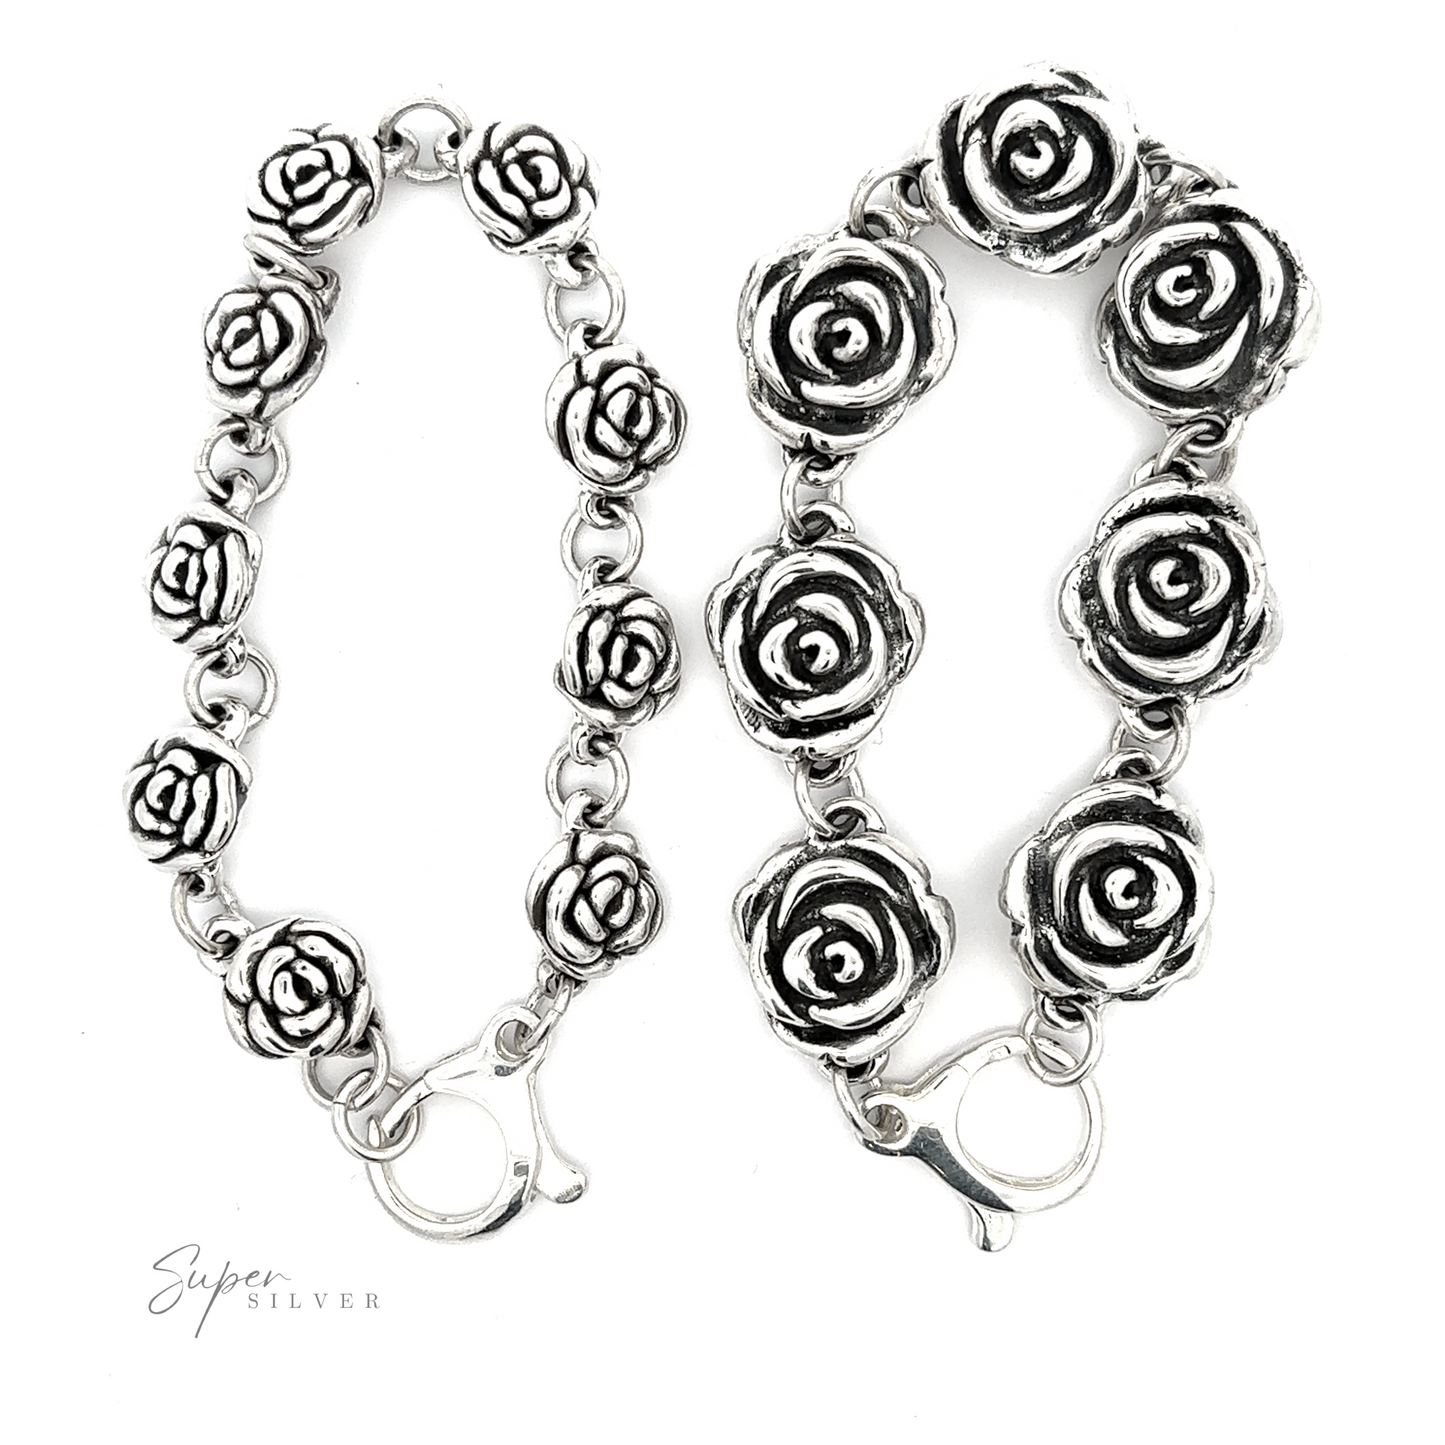 Two Chic Link Rose Bracelets are displayed side by side on a white background. One bracelet has smaller roses, the other has larger ones, giving off a vintage vibe. Both clasps are visible.